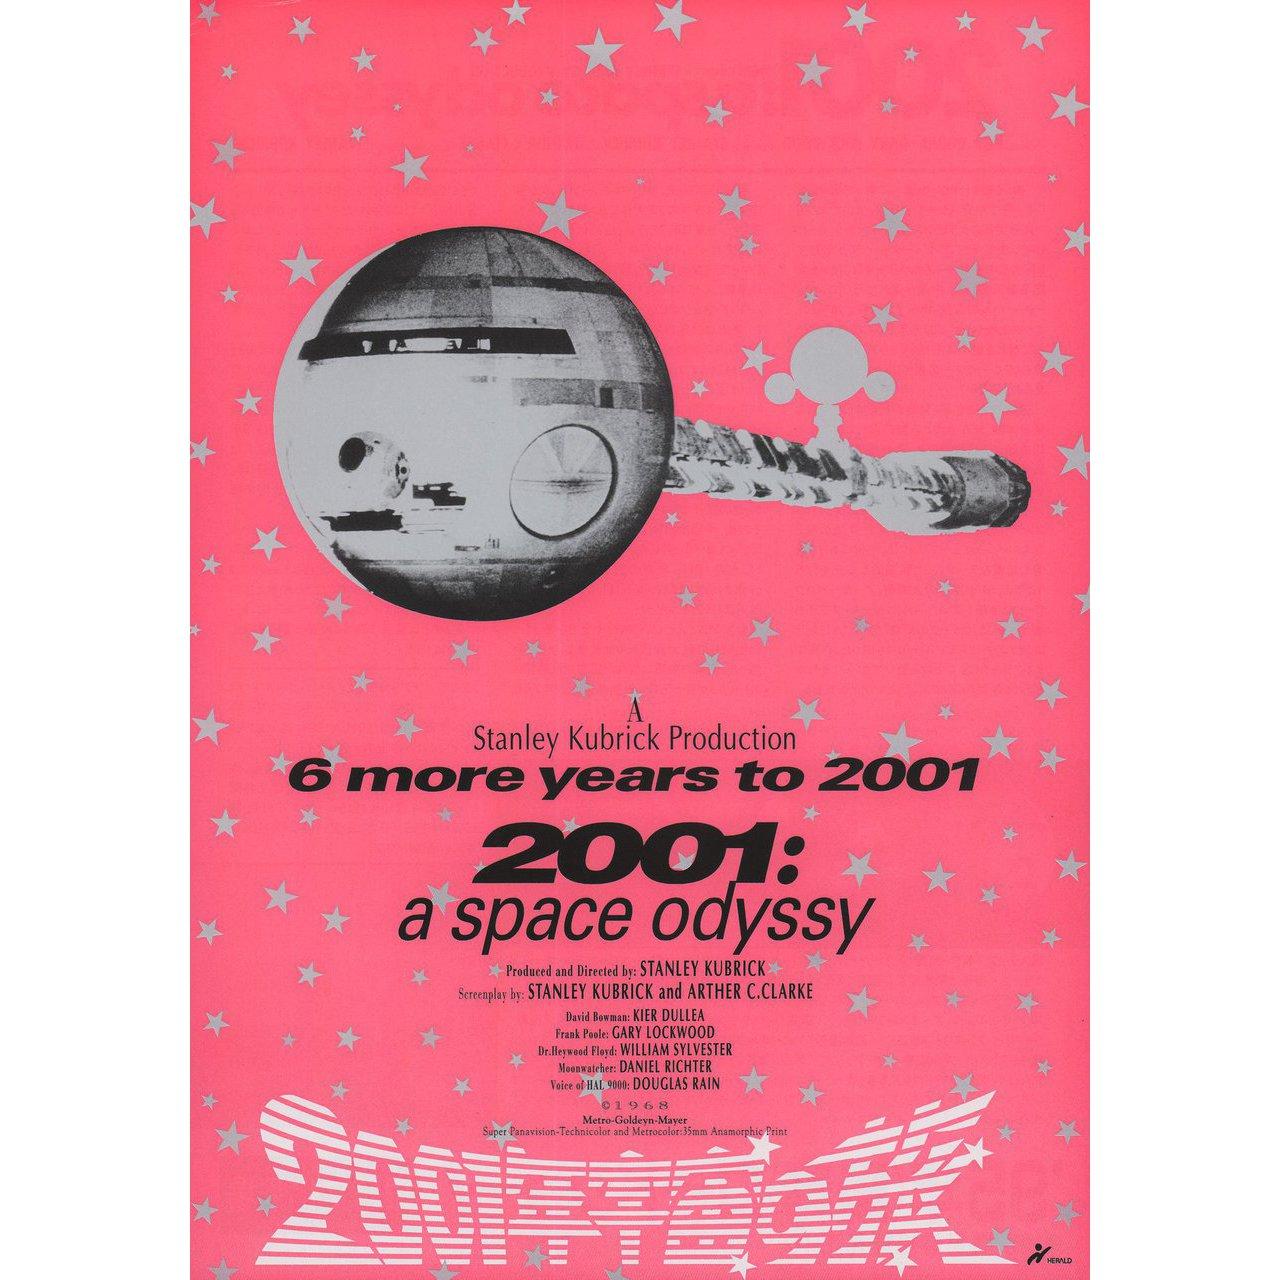 Original 1995 re-release Japanese B5 chirashi flyer for the 1968 film 2001: A Space Odyssey directed by Stanley Kubrick with Keir Dullea / Gary Lockwood / William Sylvester / Daniel Richter. Fine condition, rolled. Please note: the size is stated in